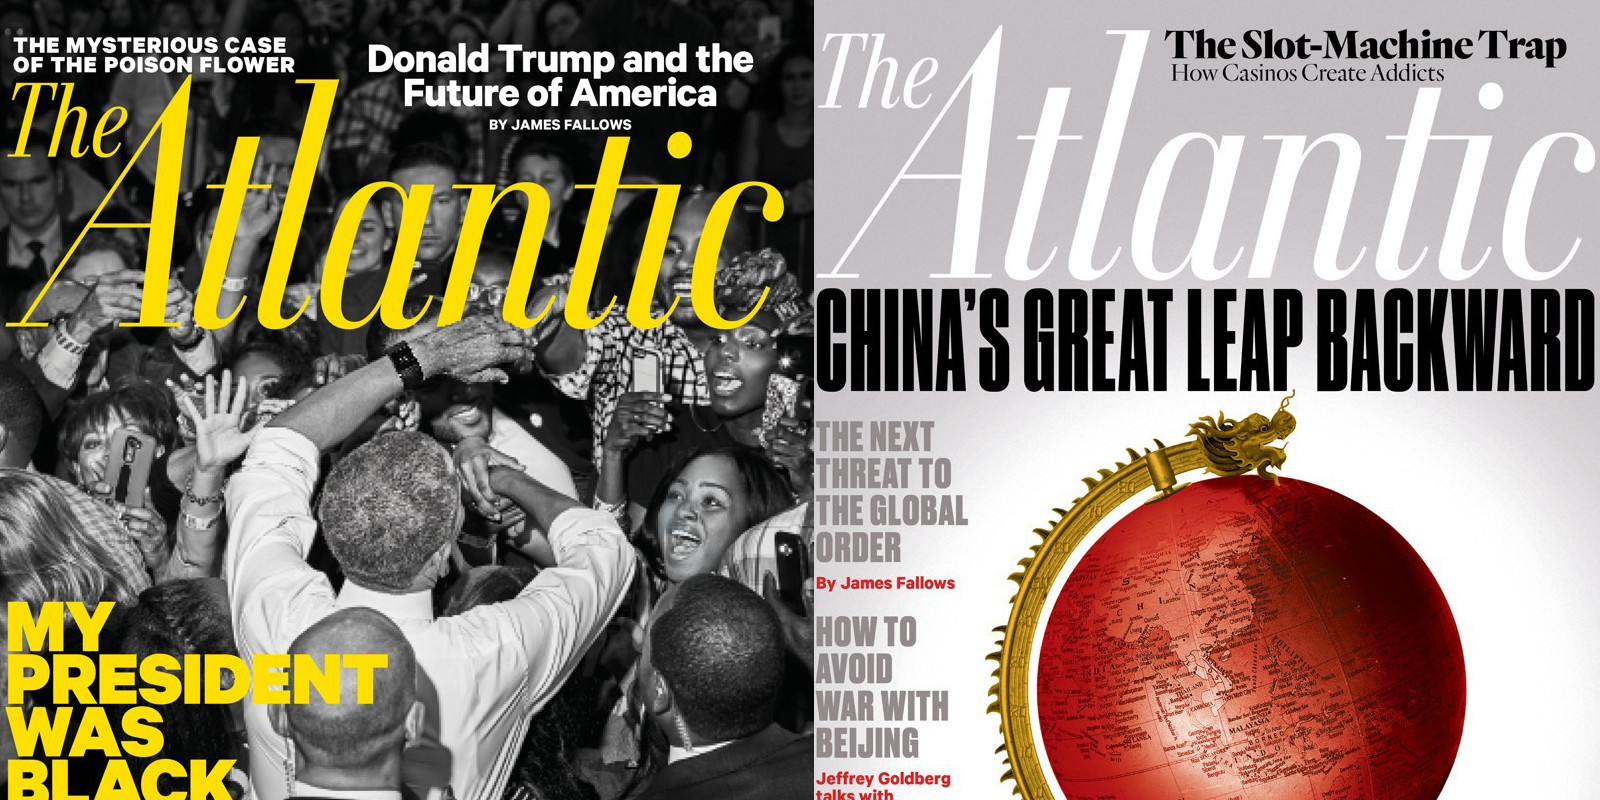 You can grab a 3year sub to The Atlantic Magazine w/ iPhone/iPad